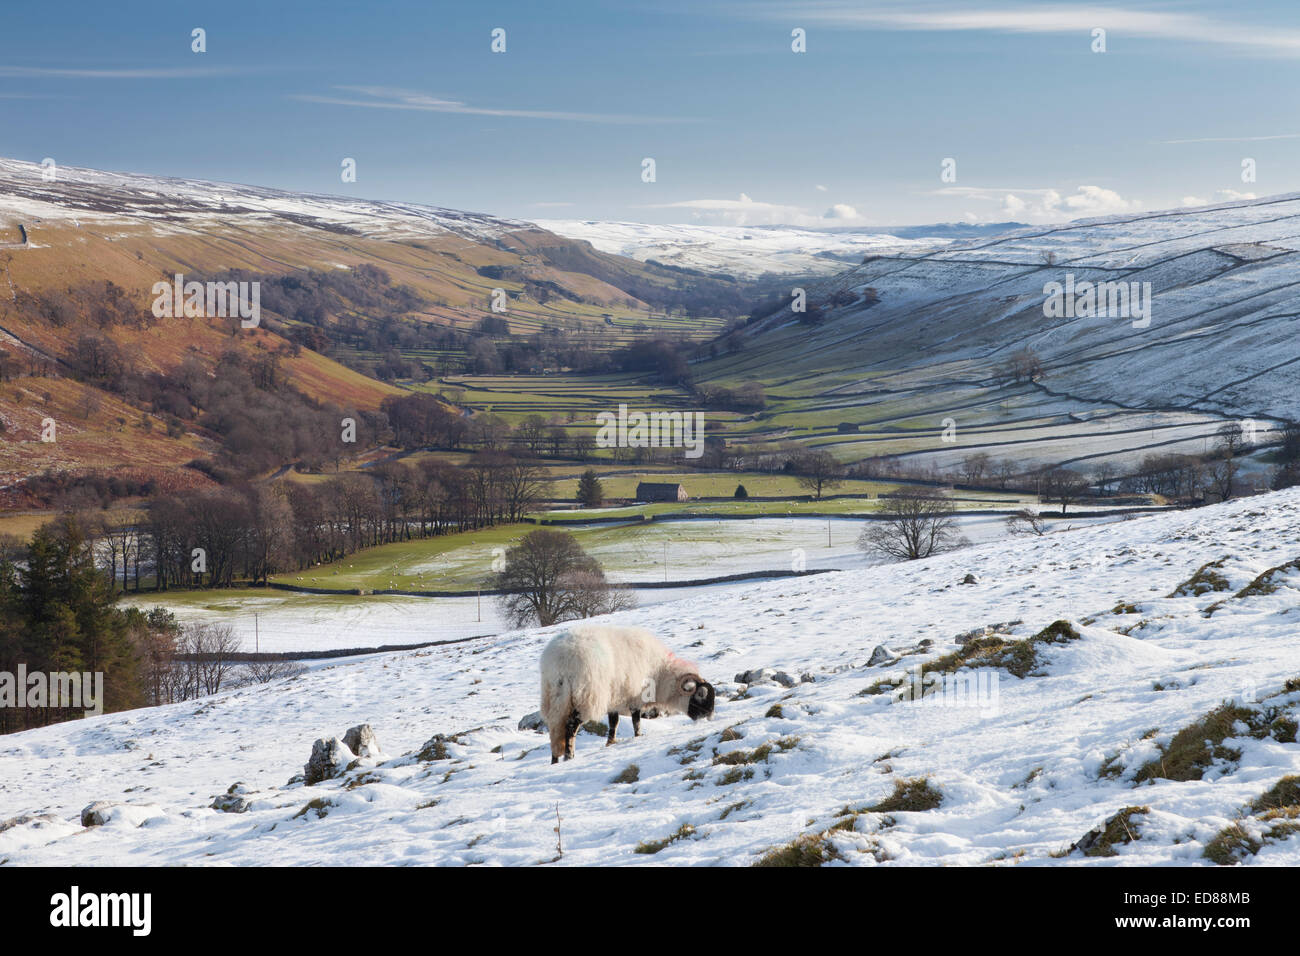 Littondale under snow in The Yorkshire Dales, England. Stock Photo